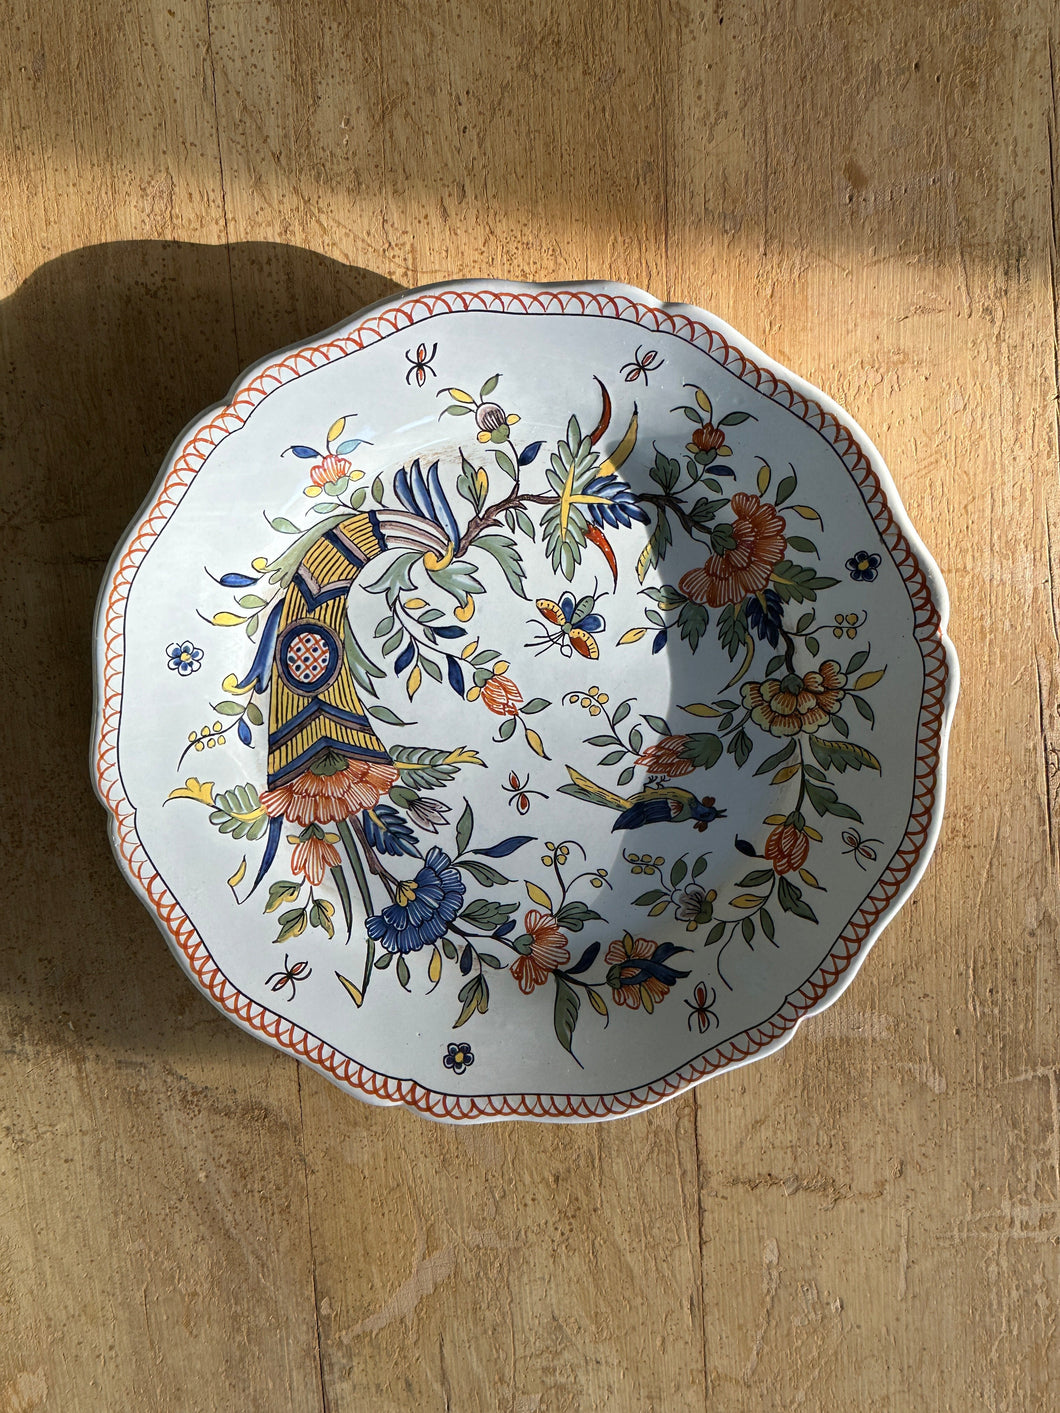 Antique French Faience Floral Plate